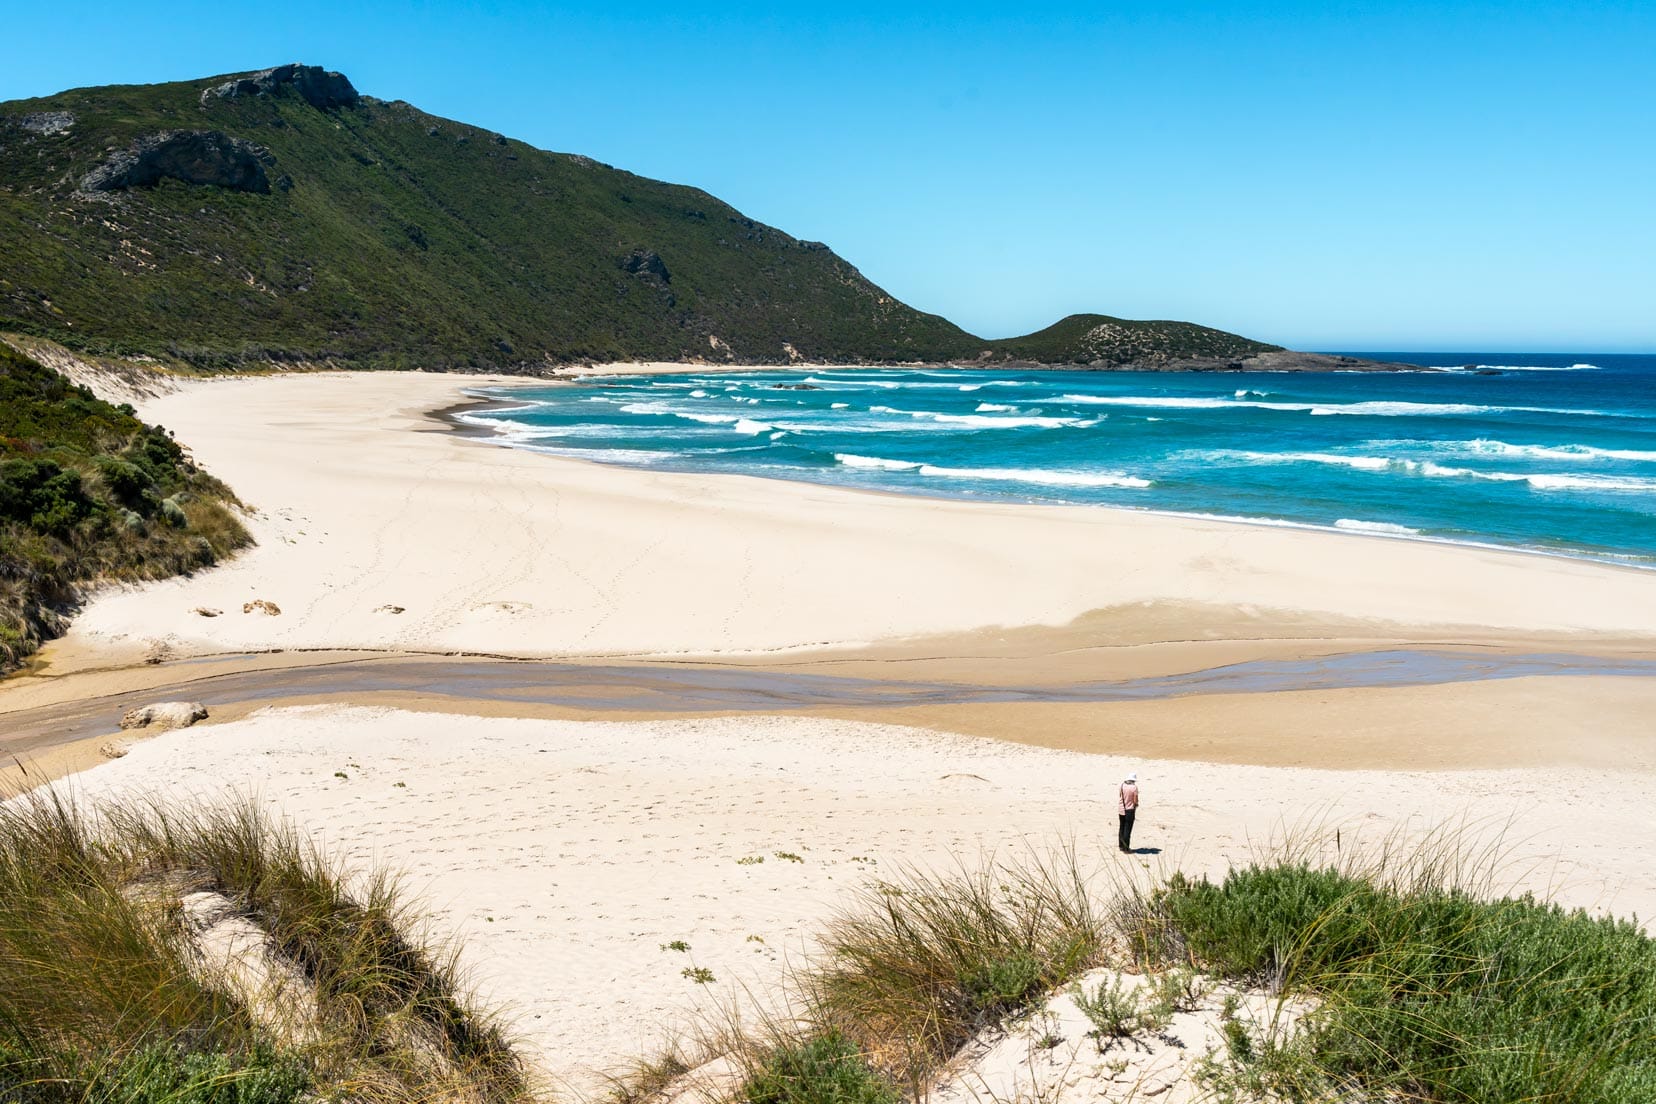 Shelley stood on Conspicuous cliff beach with a sweeping bay of white sand and a backdrop of green hills 